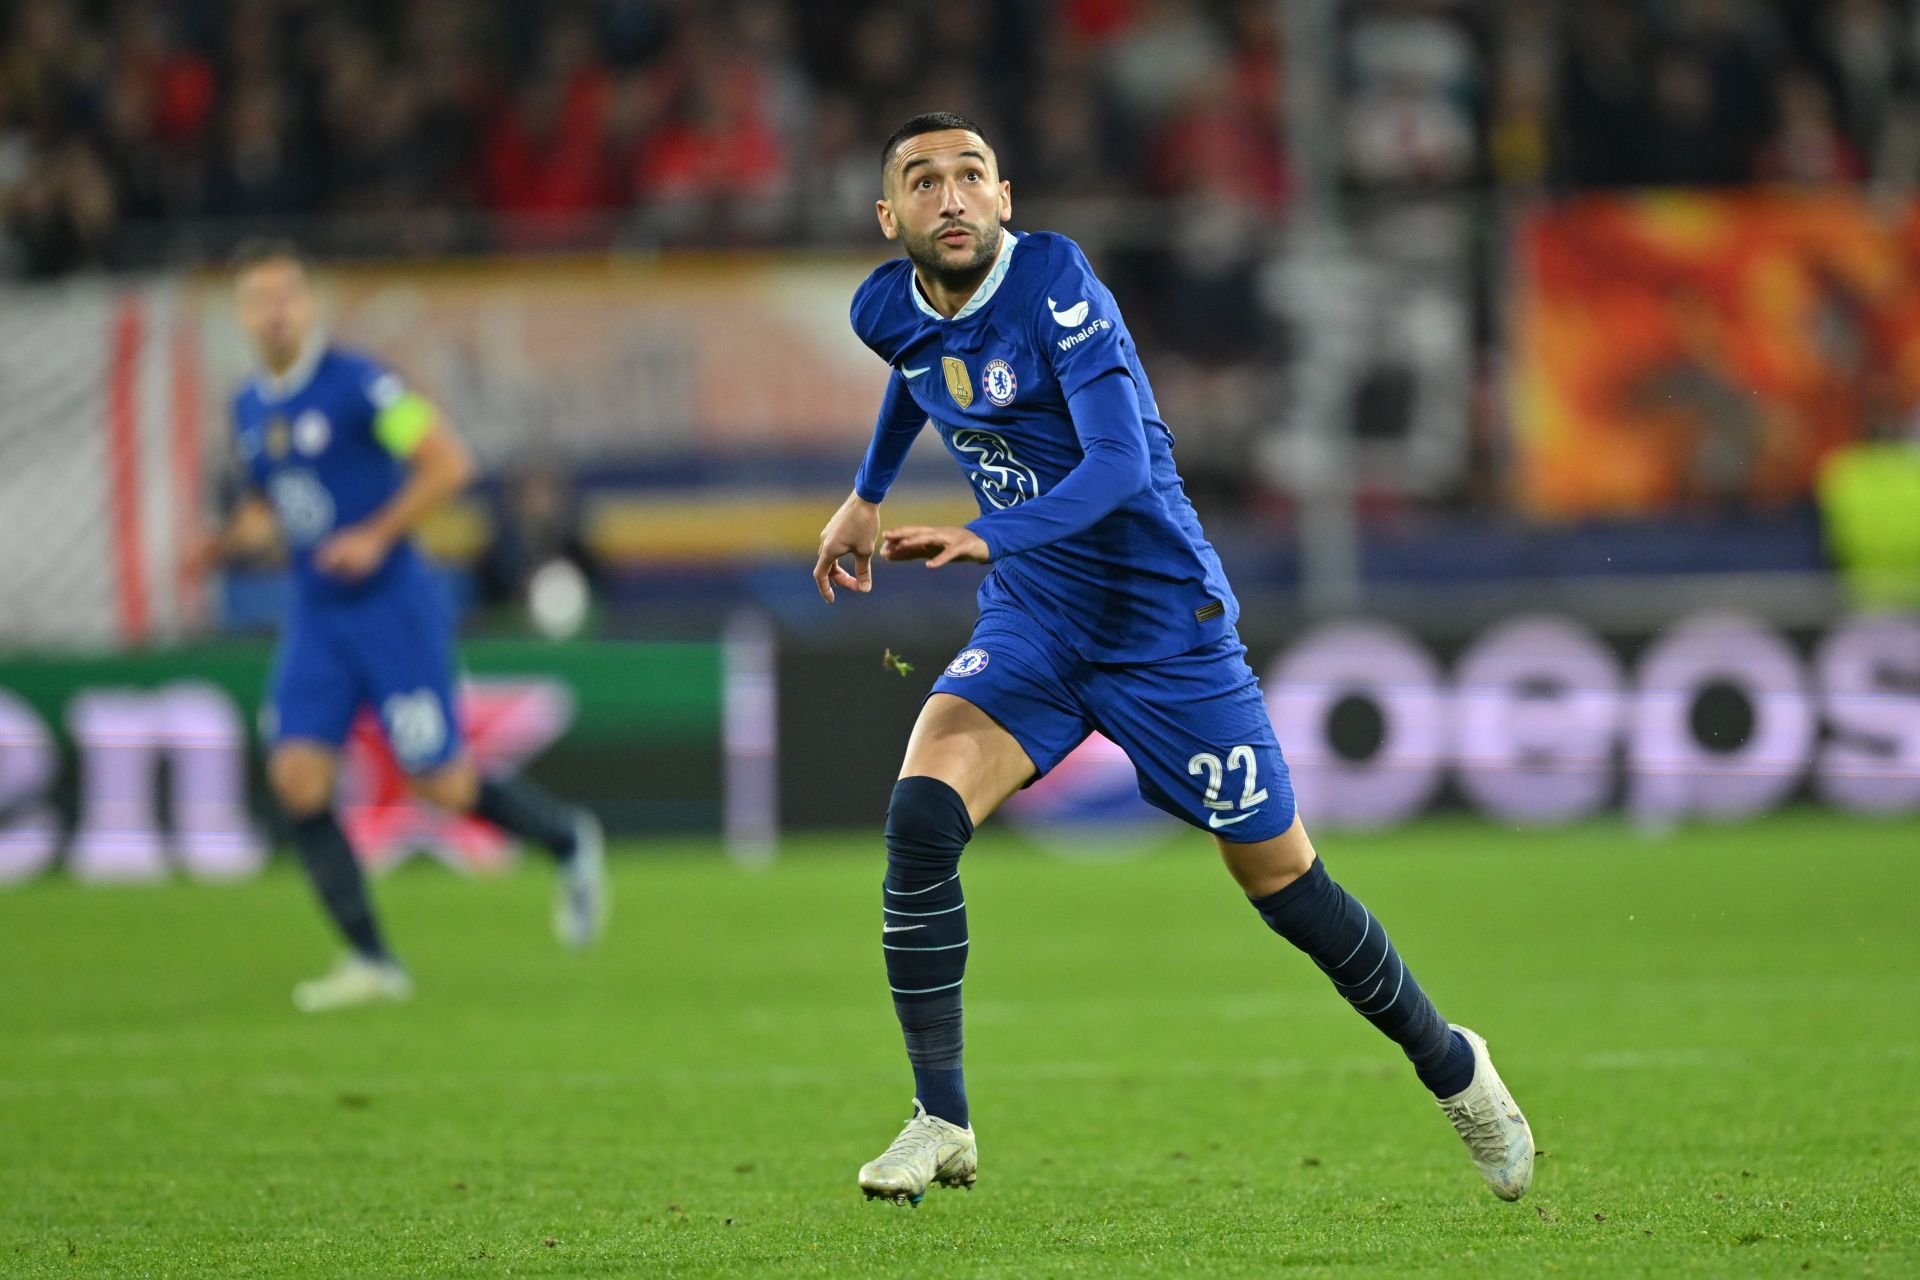 Hakim Ziyech led Morocco to an unexpected World Cup semifinal run in Qatar